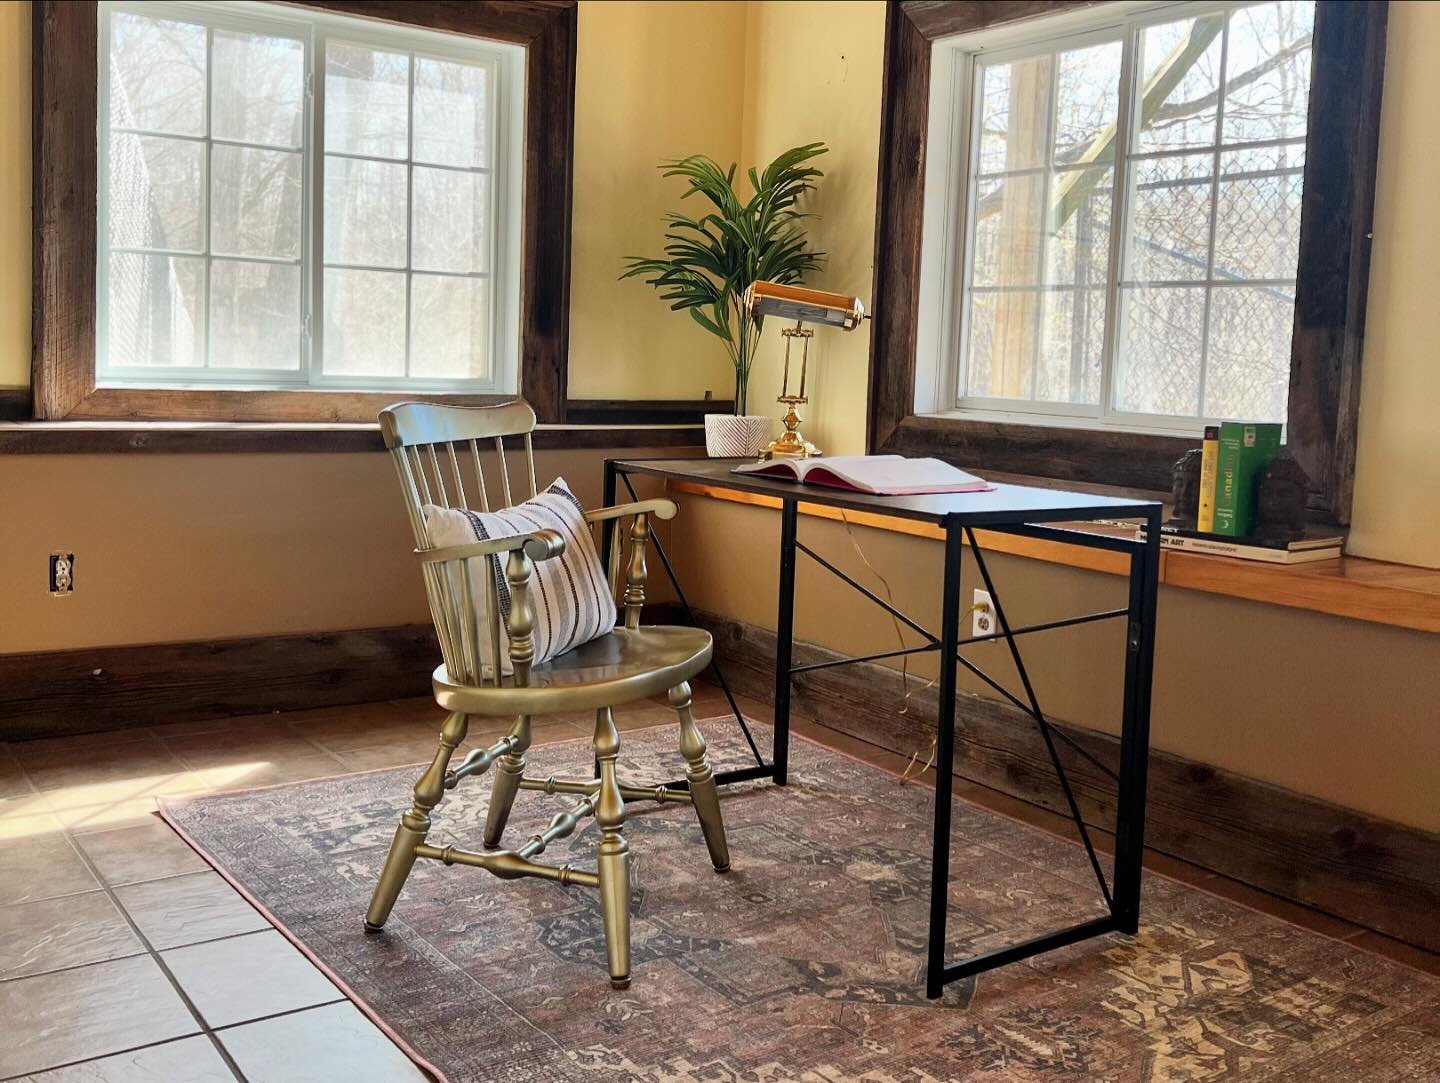 A charming office with a view. 
Swipe for the before!